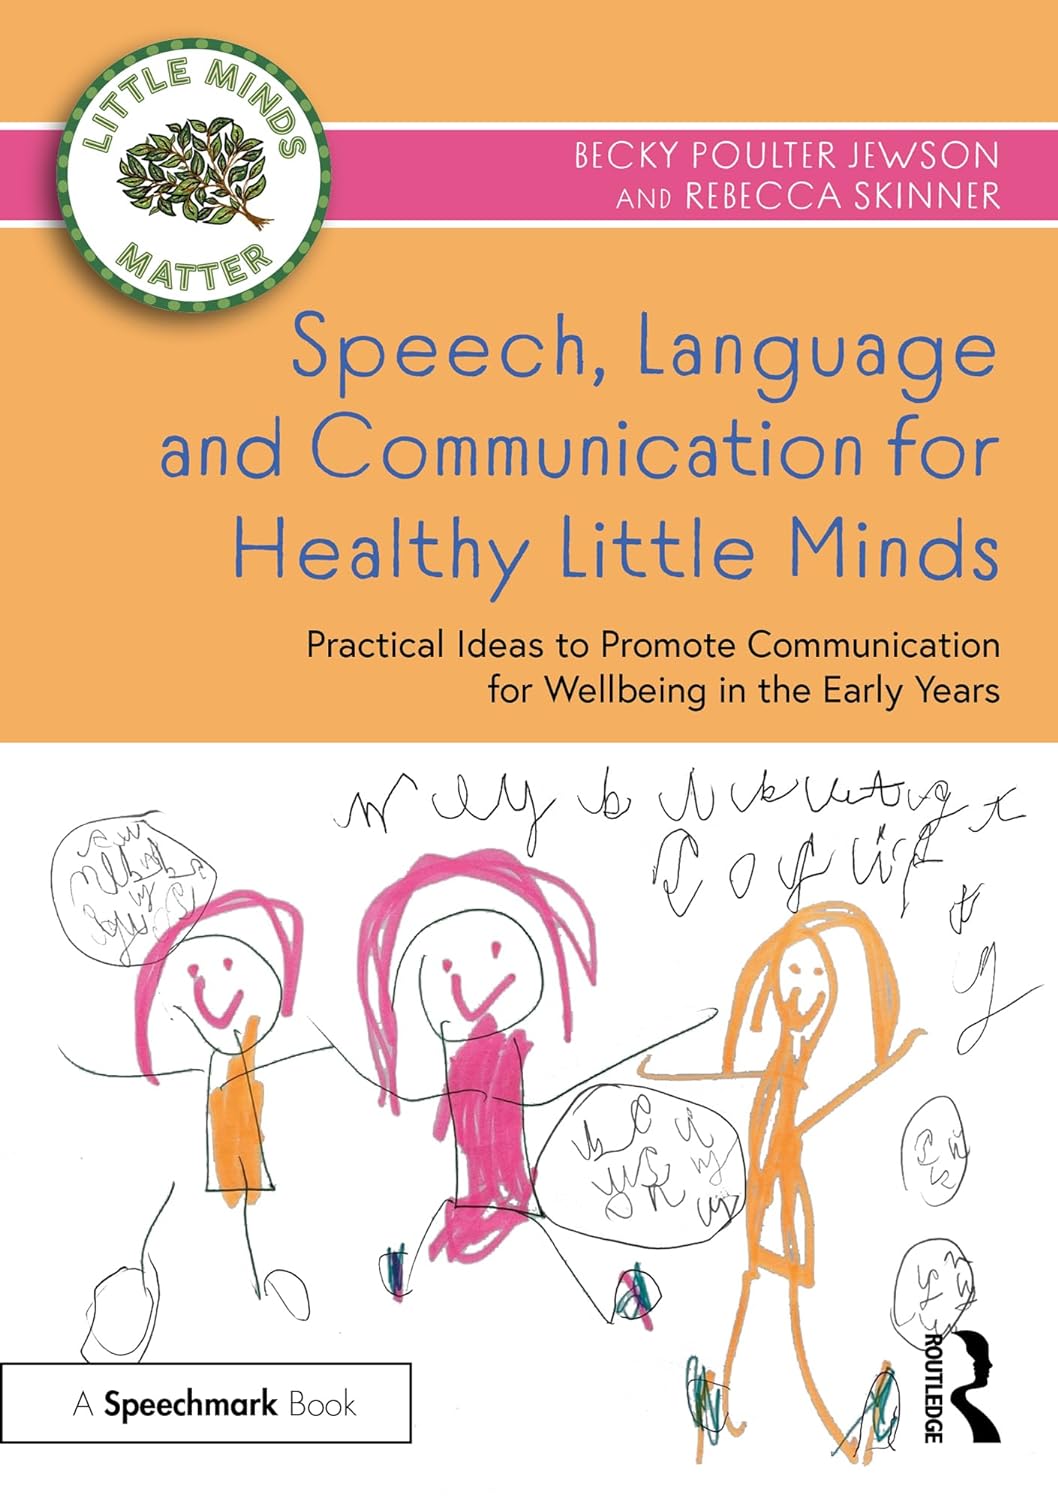 Speech, Language And Communication For Healthy Little Minds Practical Ideas To Promote Communication For Wellbeing In The Early Years (little Minds Matter) 1st Edition